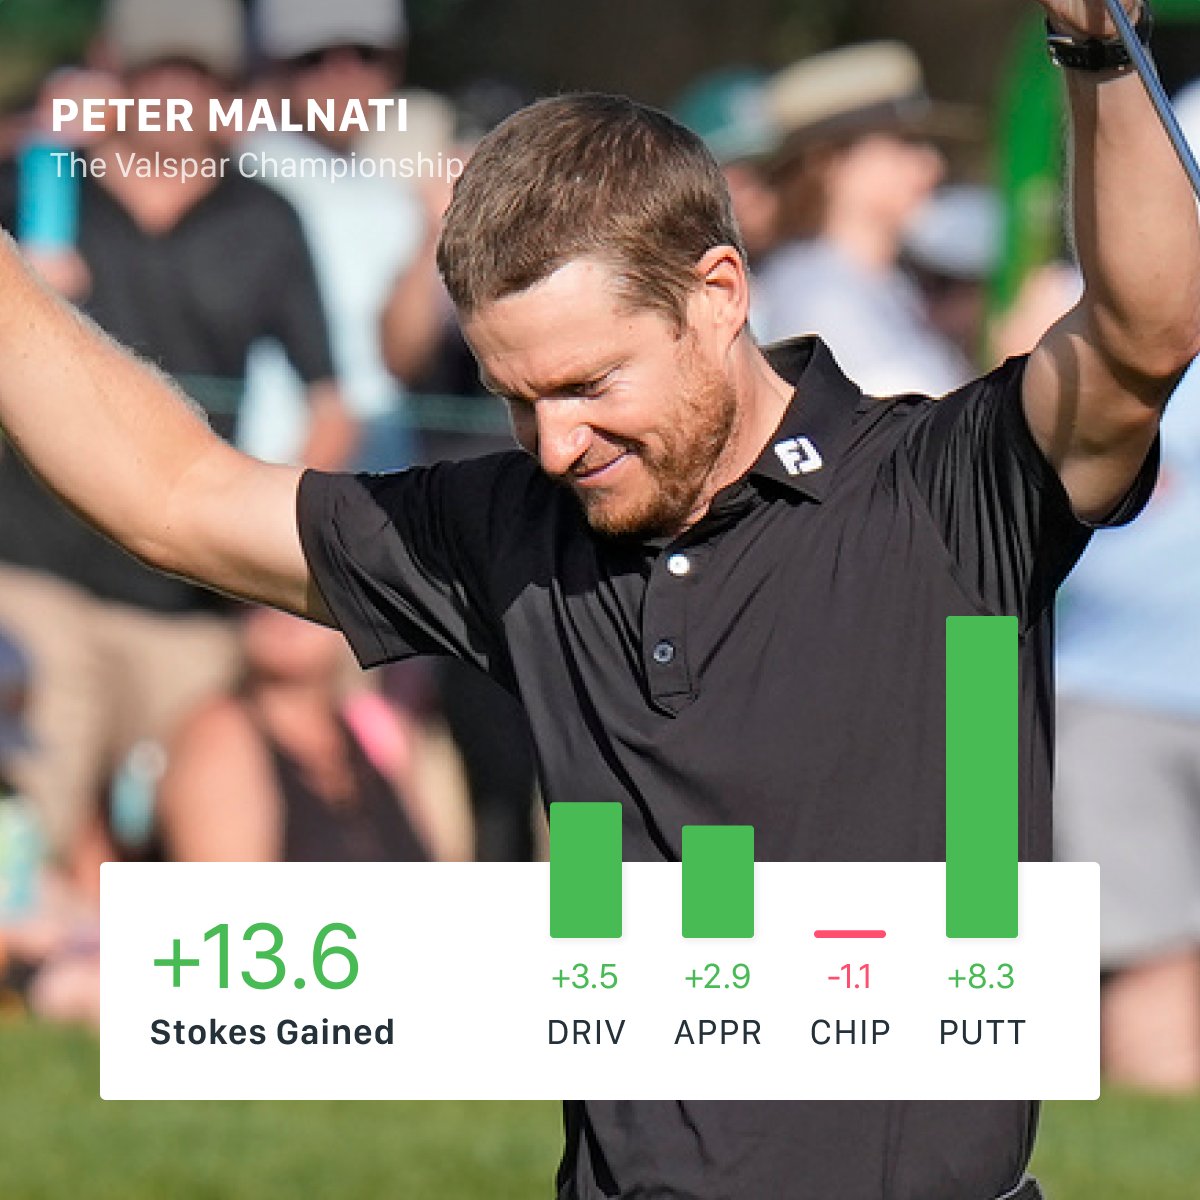 Malnati Madness. Peter Malnati snapped an eight-year winless drought with a two-stroke victory over Cameron Young on Sunday at the Valspar Championship. Malnati depended upon high-level driving and putting to lead him to victory at a difficult Copperhead Course at Innisbrook…